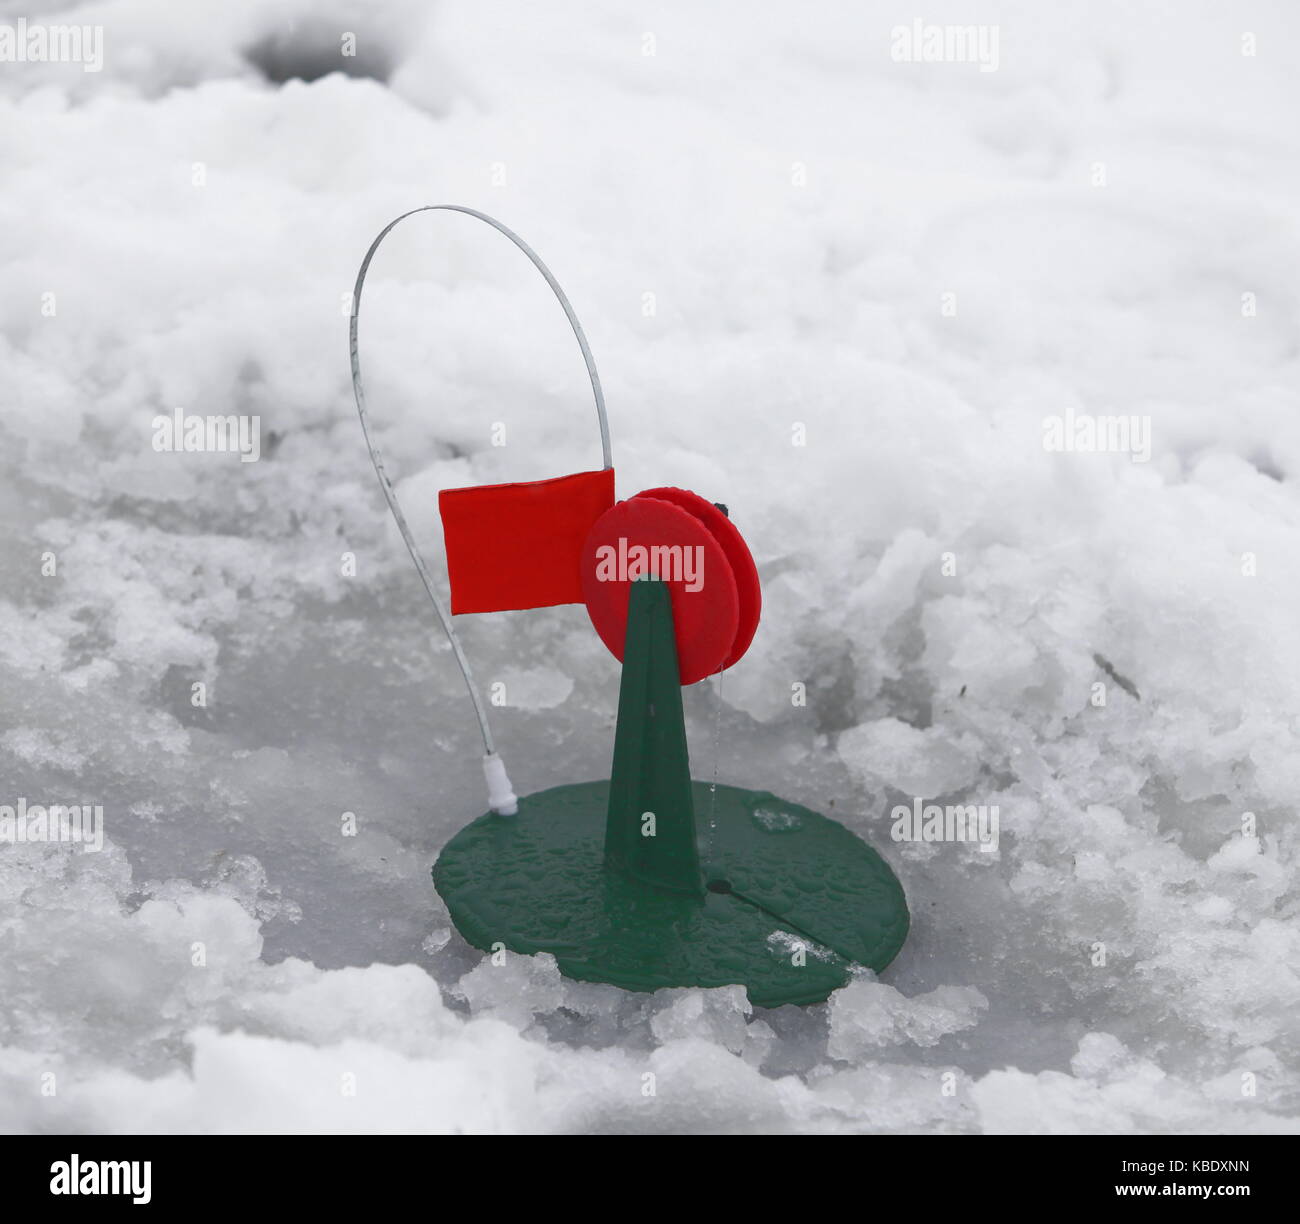 Fishing tackle for ice fishing for pike on live bait in winter Stock Photo  - Alamy